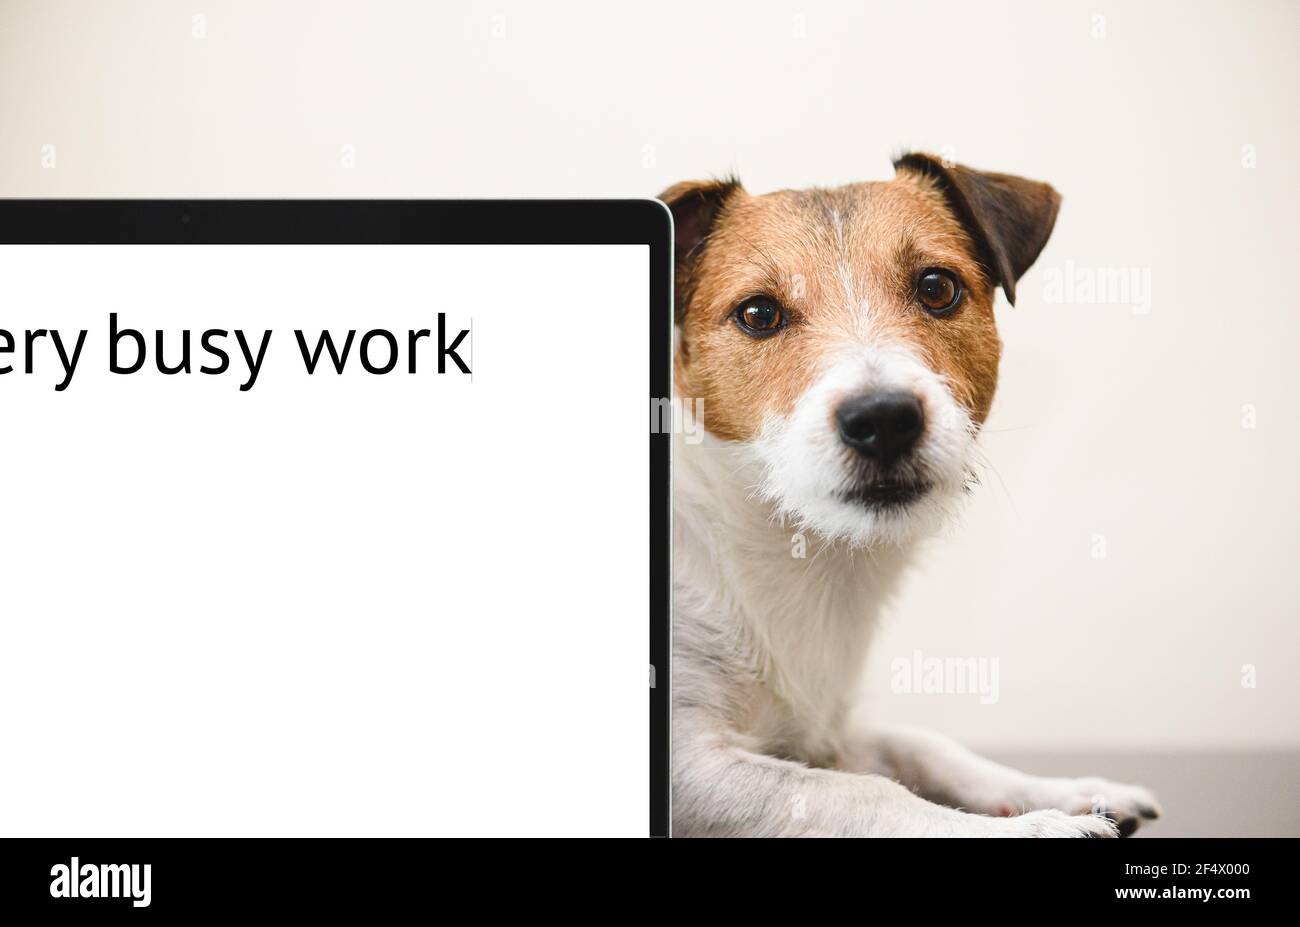 Your pet needs attention concept with sad dog peeking out behind computer display. Inscription 'Very busy work' as title of document Stock Photo